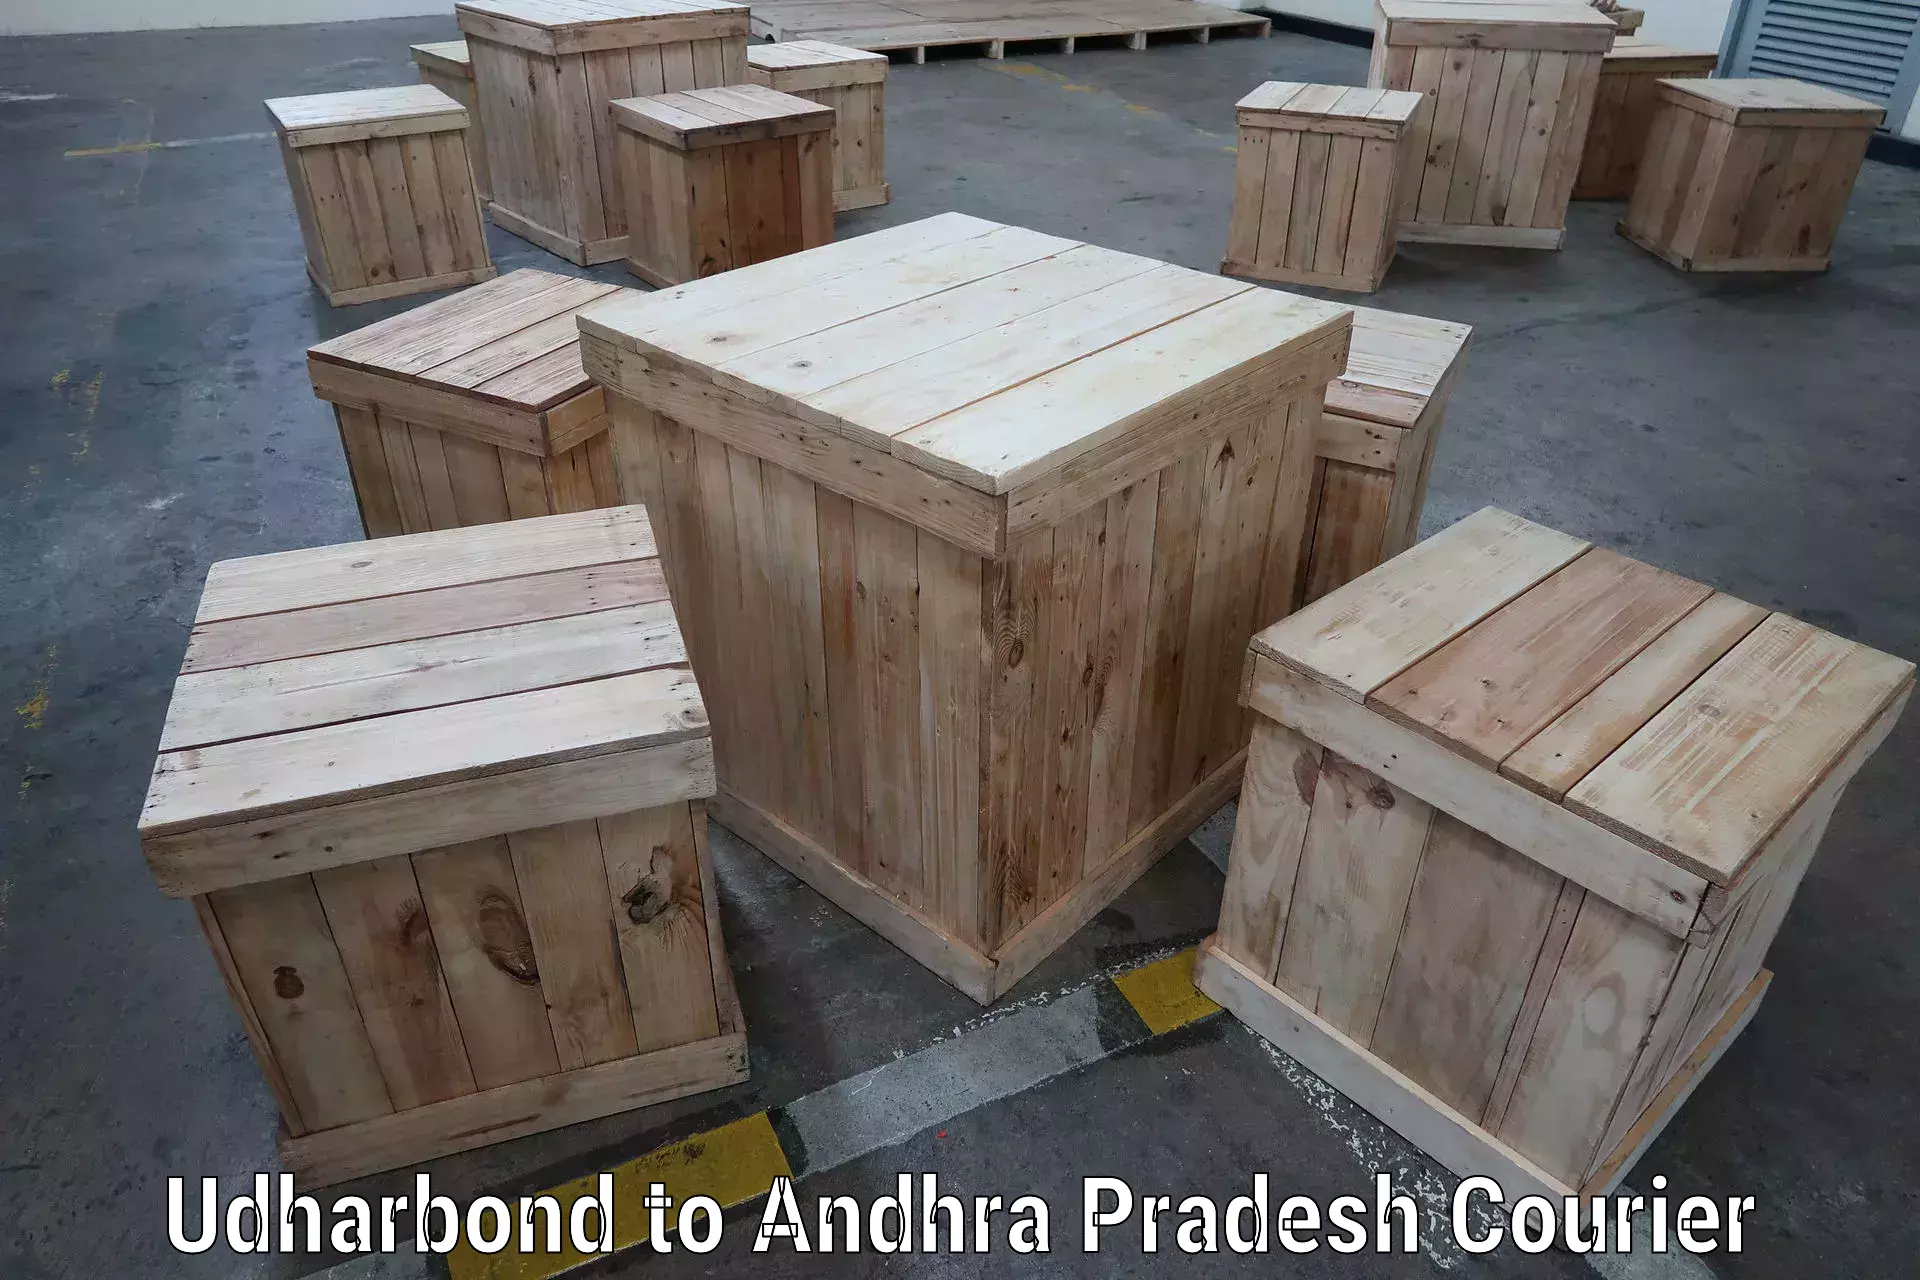 Customized shipping options Udharbond to Tuni